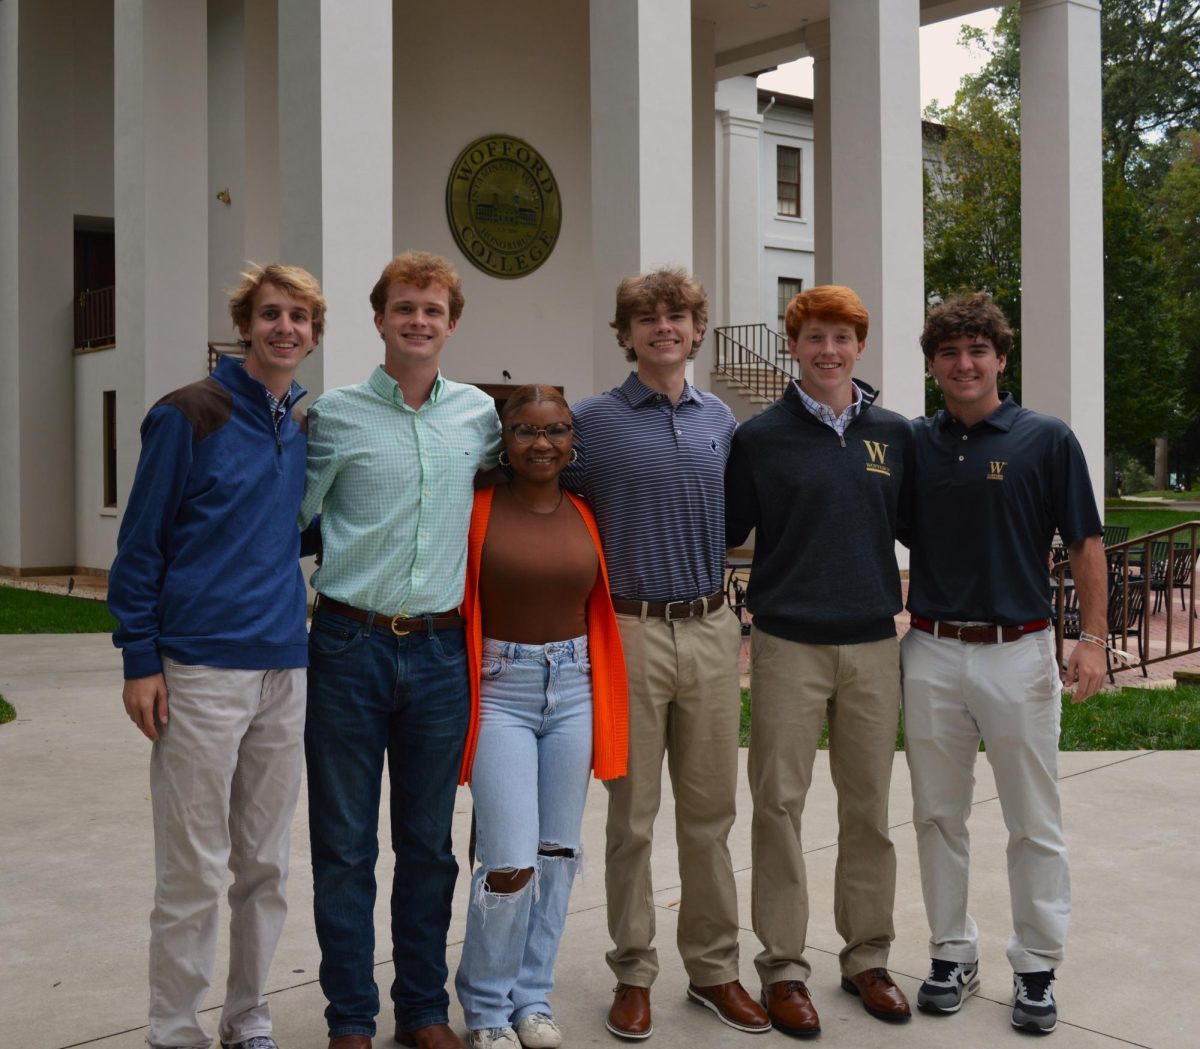 On Sept. 20, the election for Freshman Delegates for Campus Union was held. 6 students: Wilson Frerichs ‘27, Ollie Fegenbush ‘27, Kerrington Pinkney ‘27, Matt Myers ‘27, Gage Gettys ‘27 and Drew Billig ‘27 were elected by their peers.